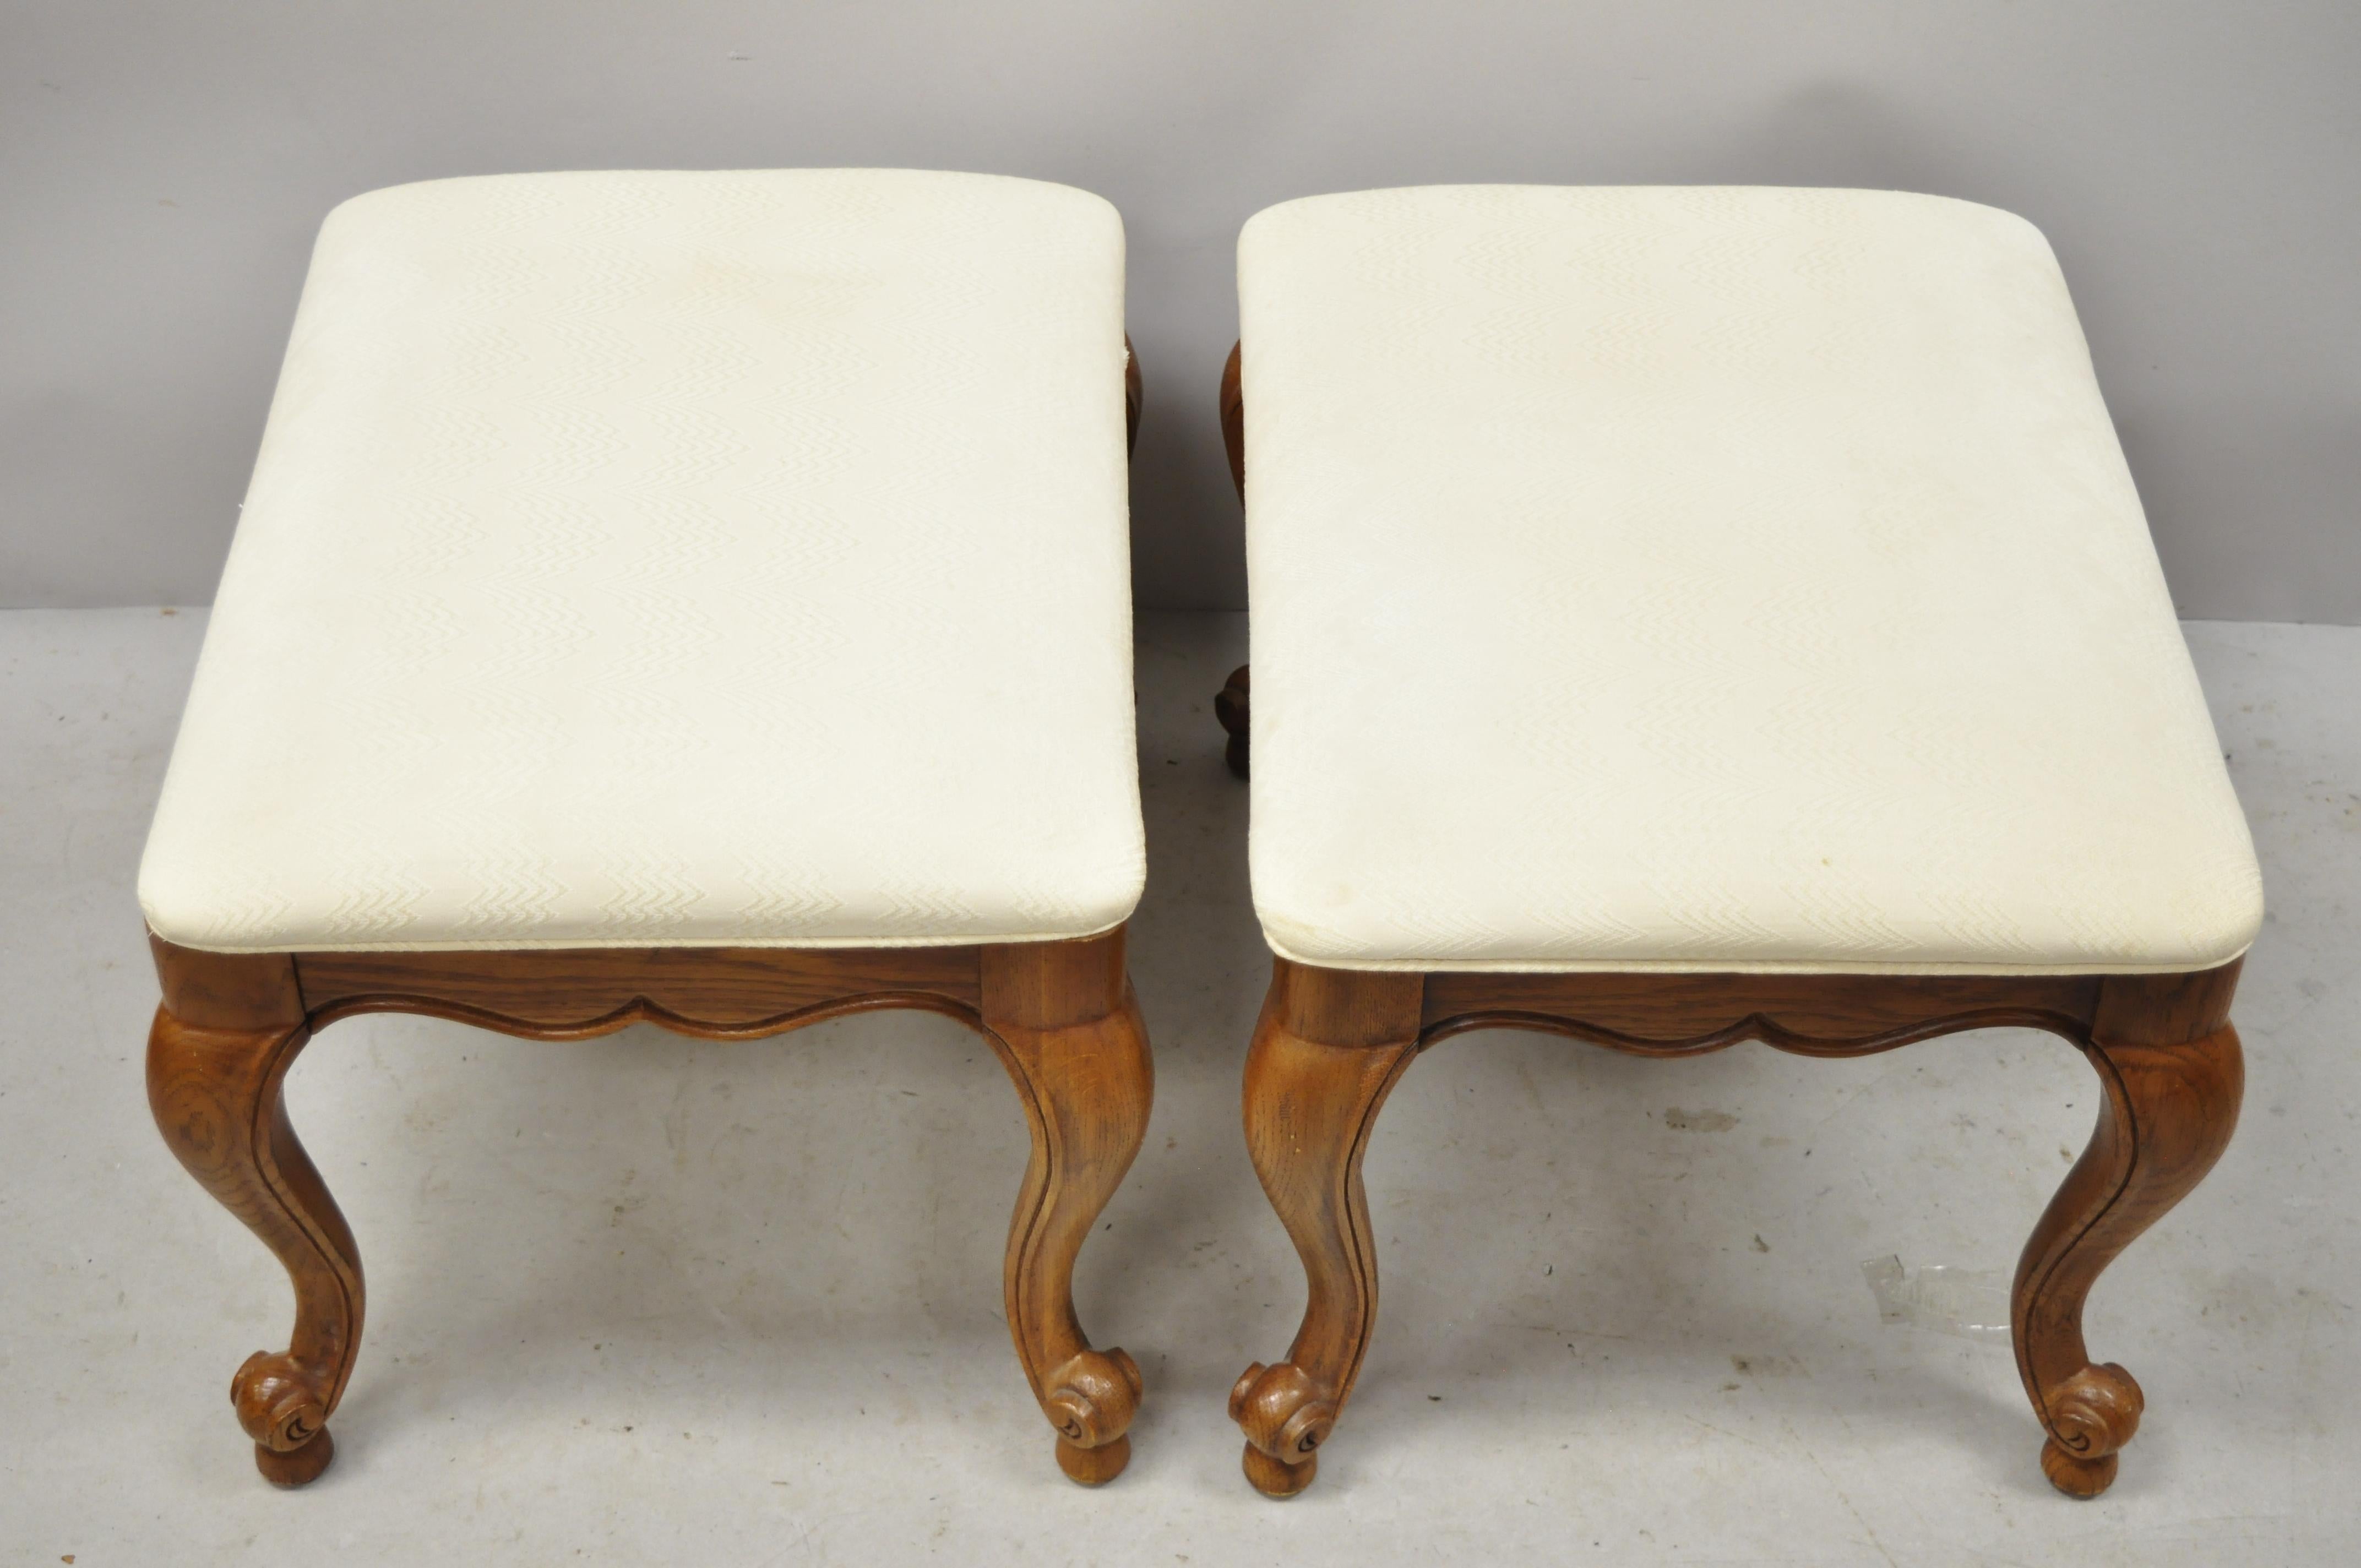 Vintage Drexel French Provincial Oakwood Cabriole Leg Stool Bench, a Pair 1